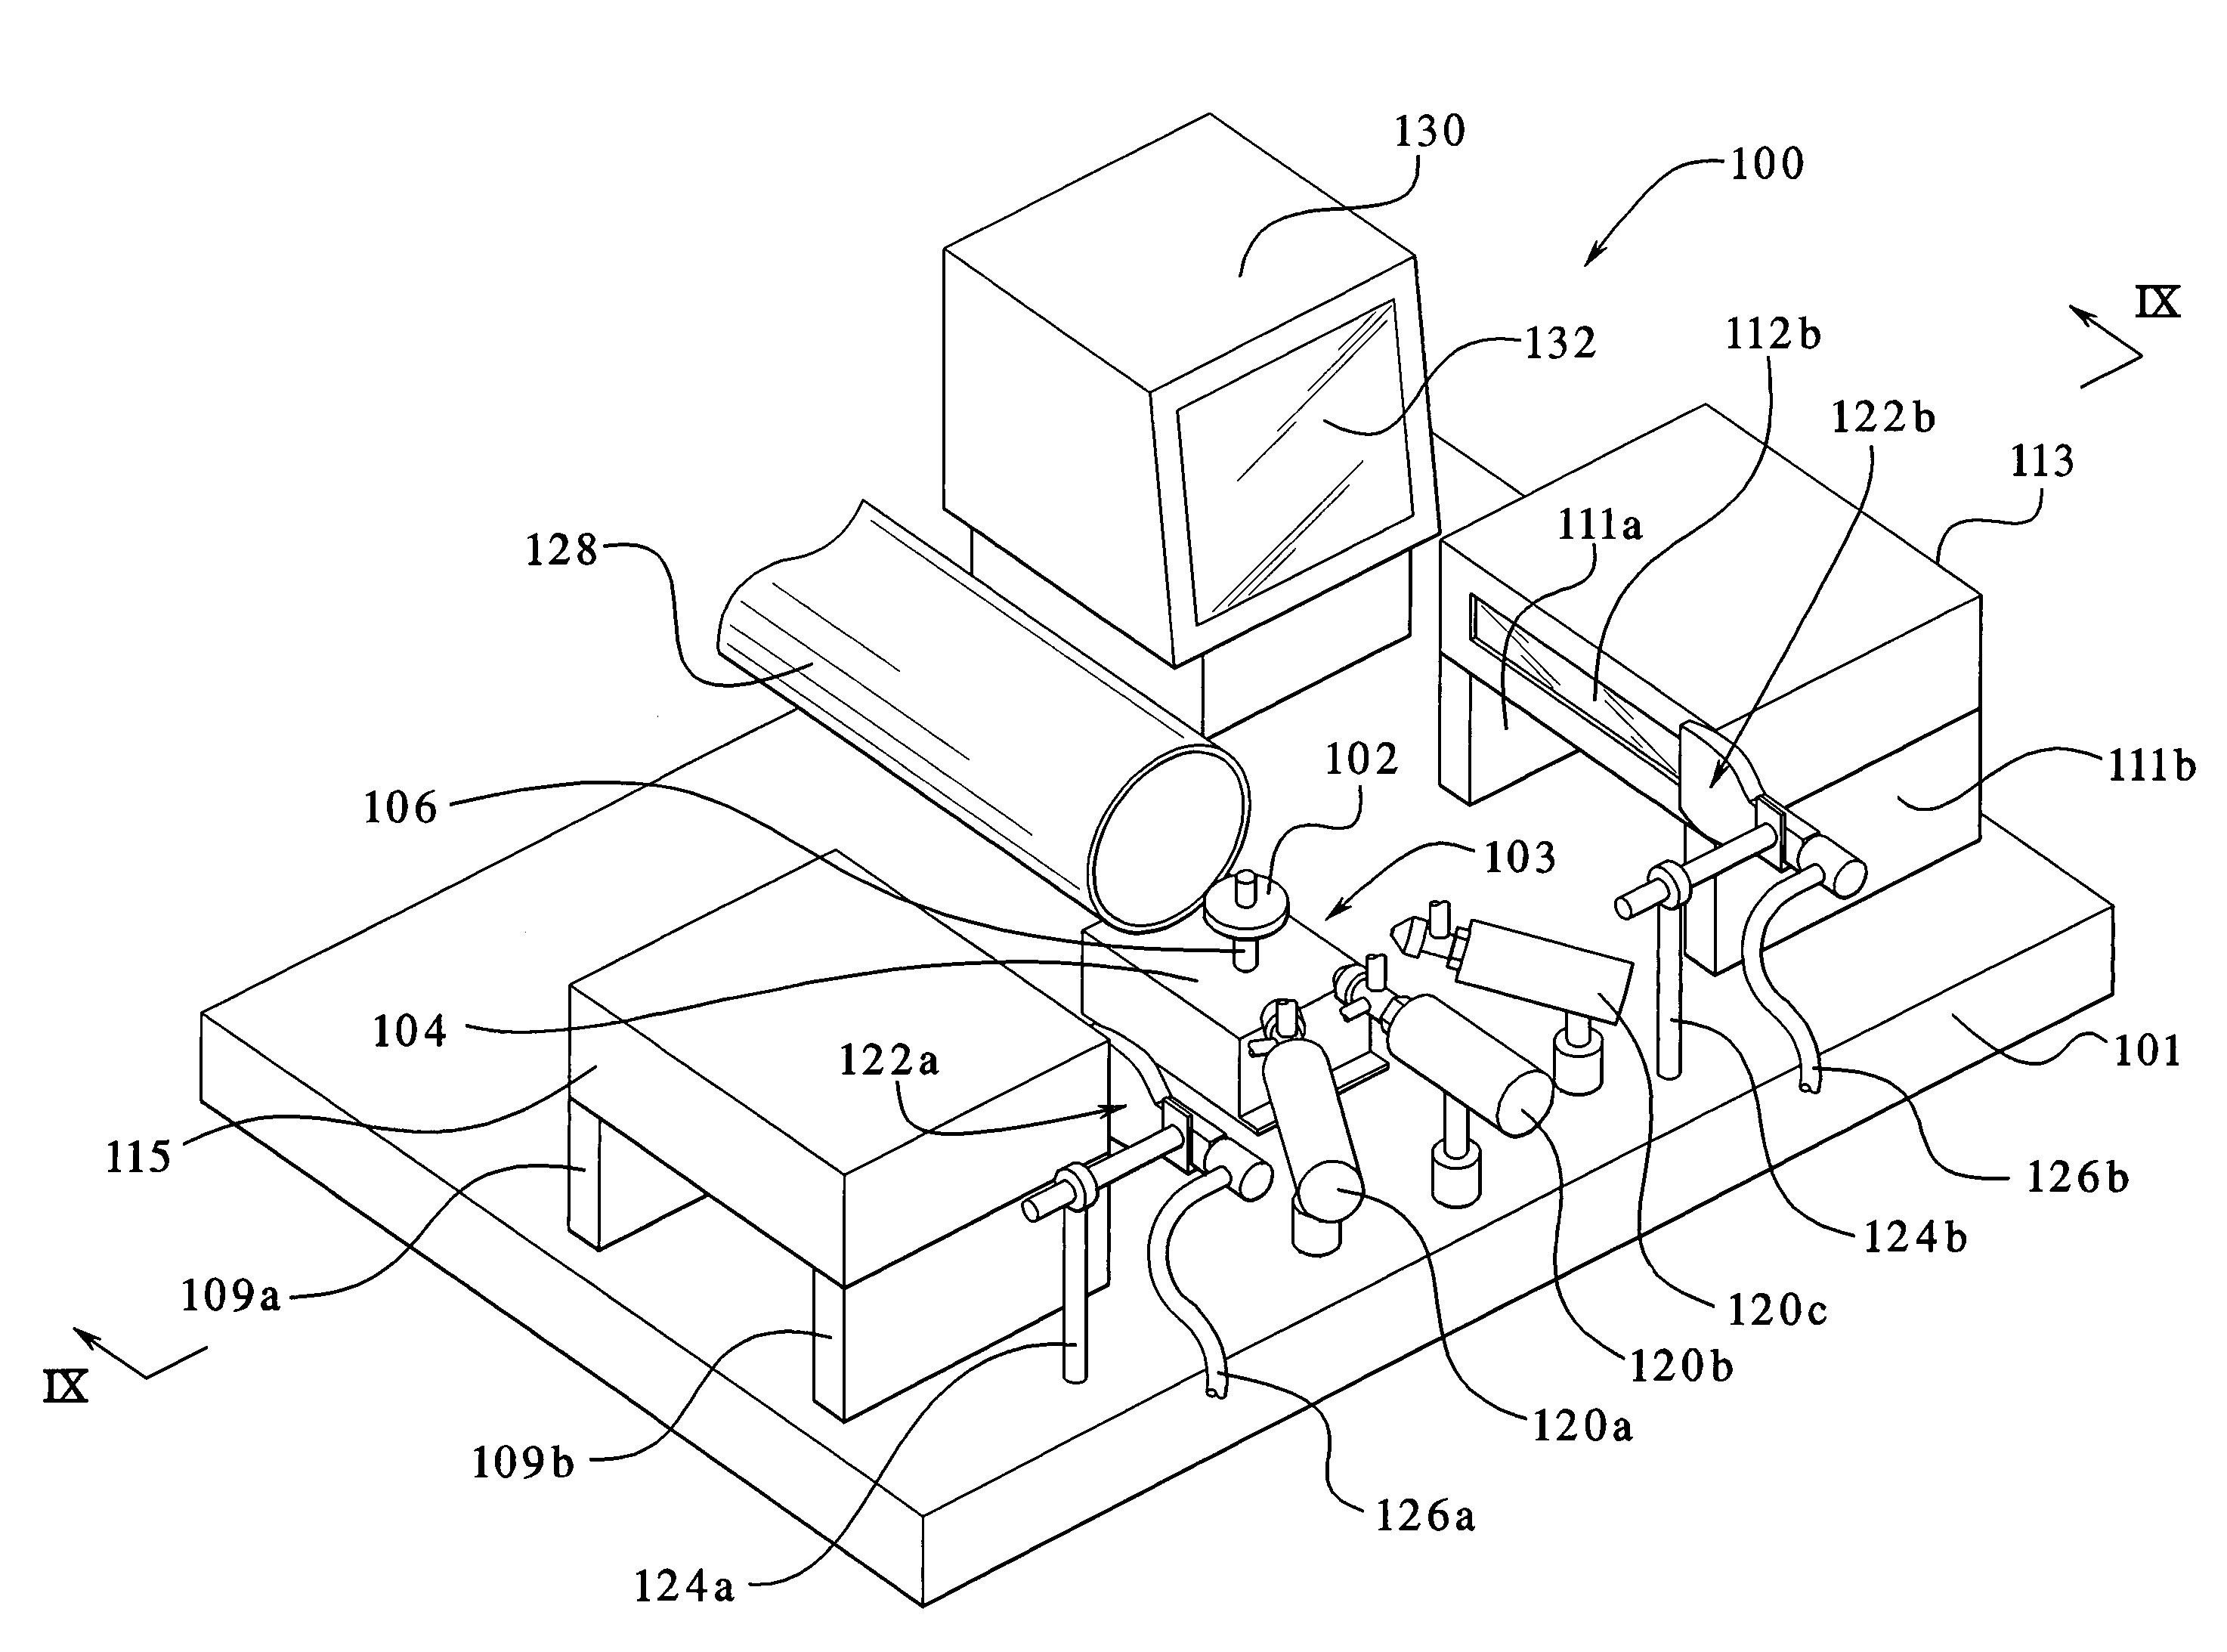 Apparatus for simultaneously coating and measuring parts